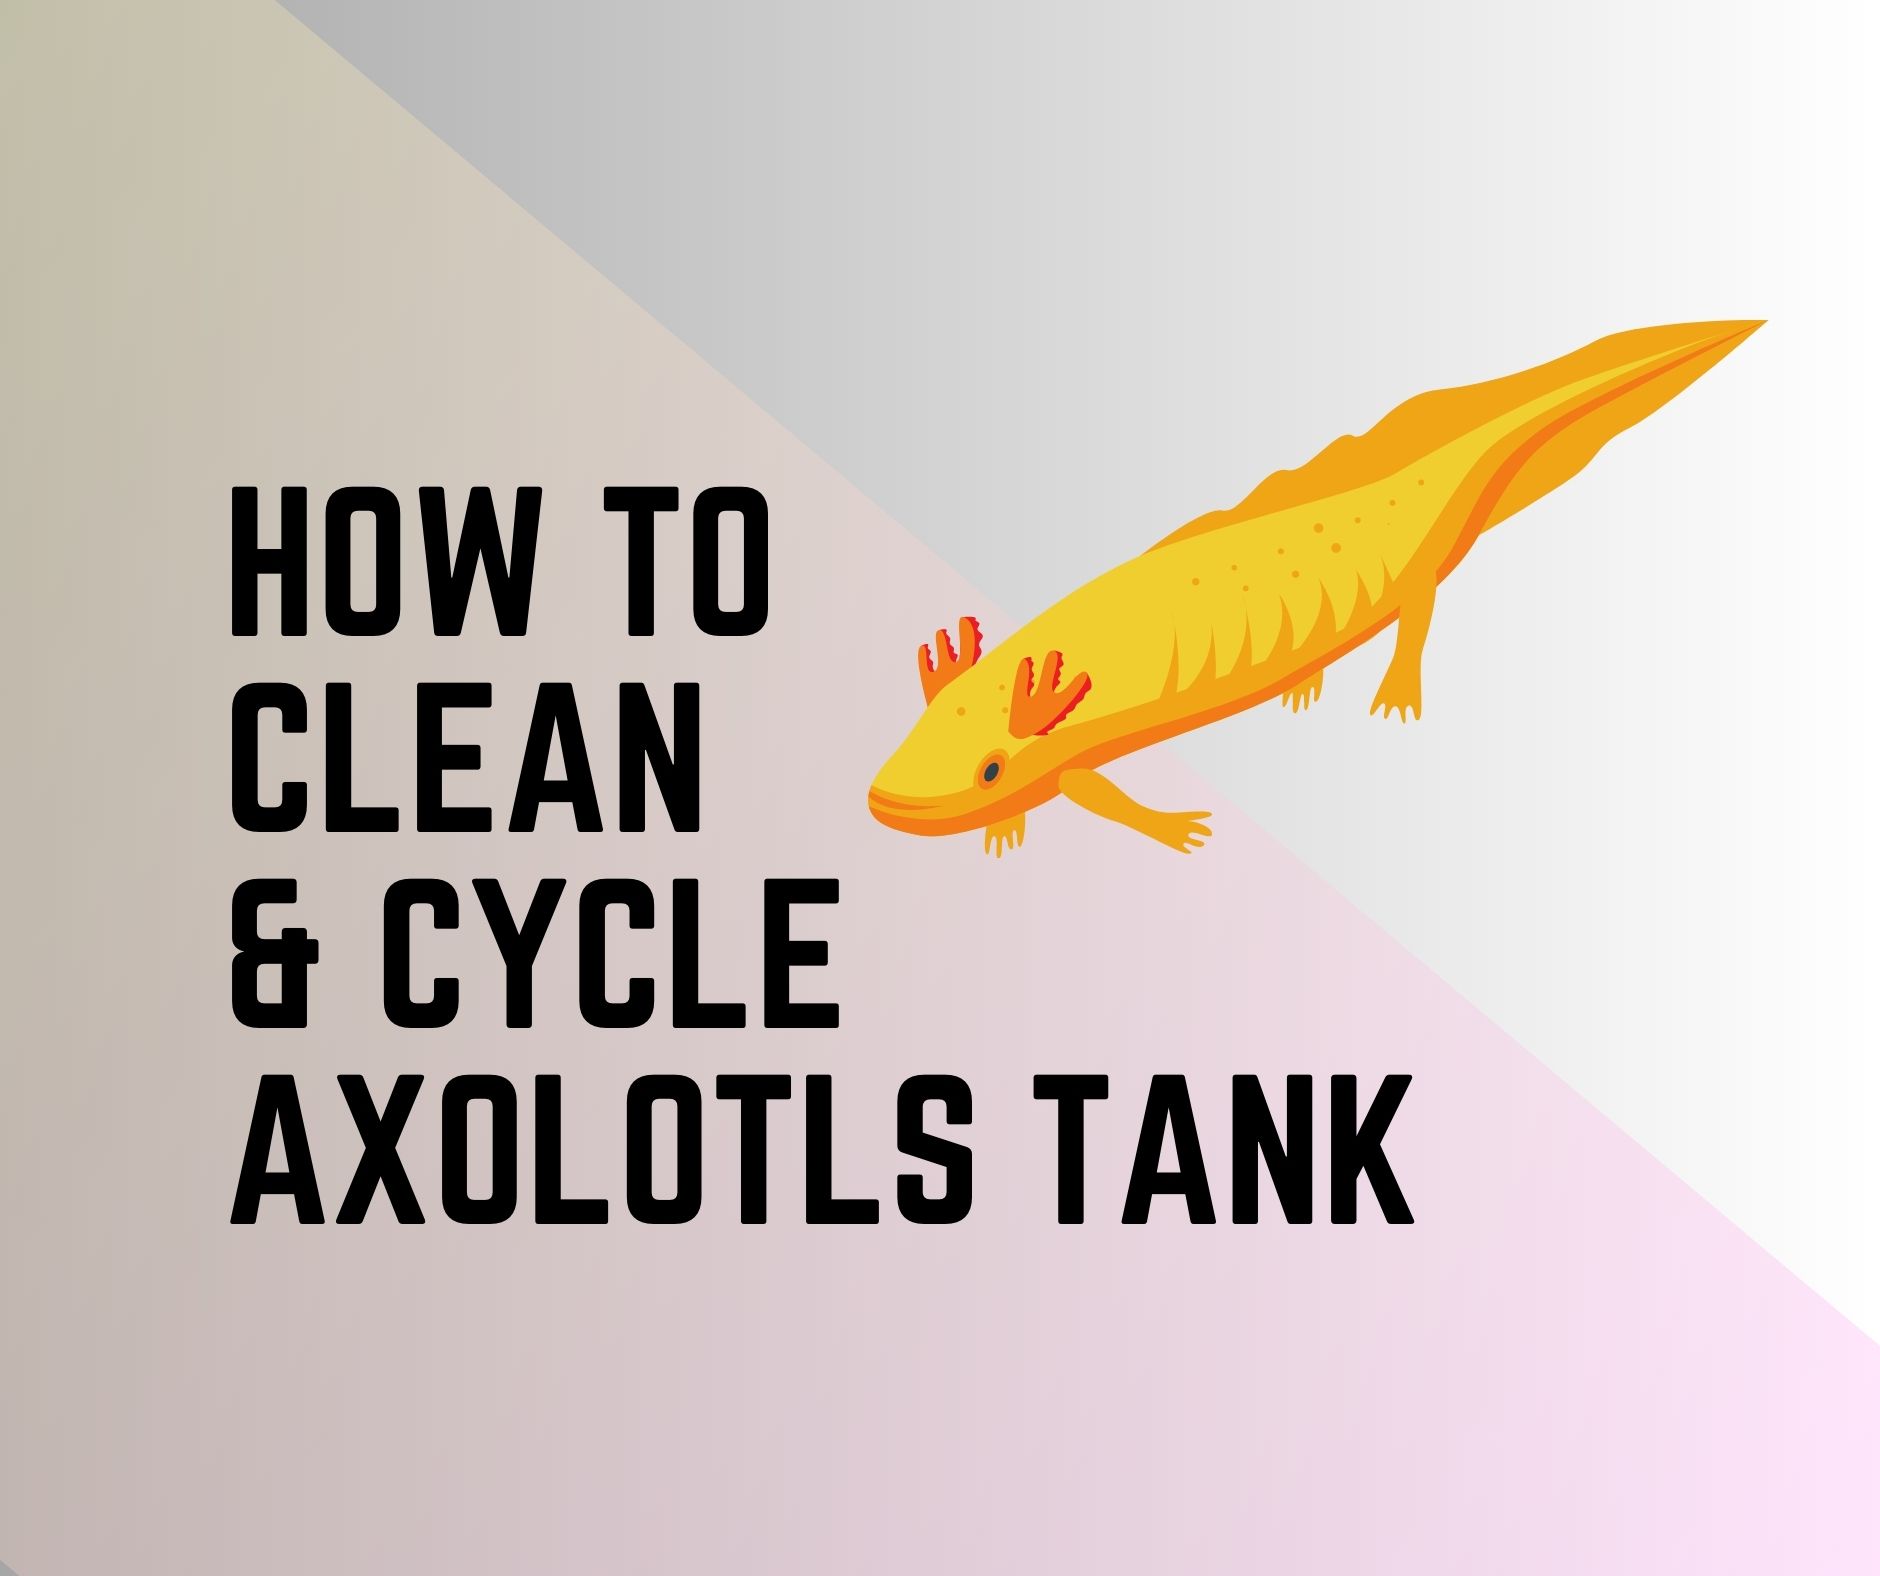 How to clean your Axolotl tank